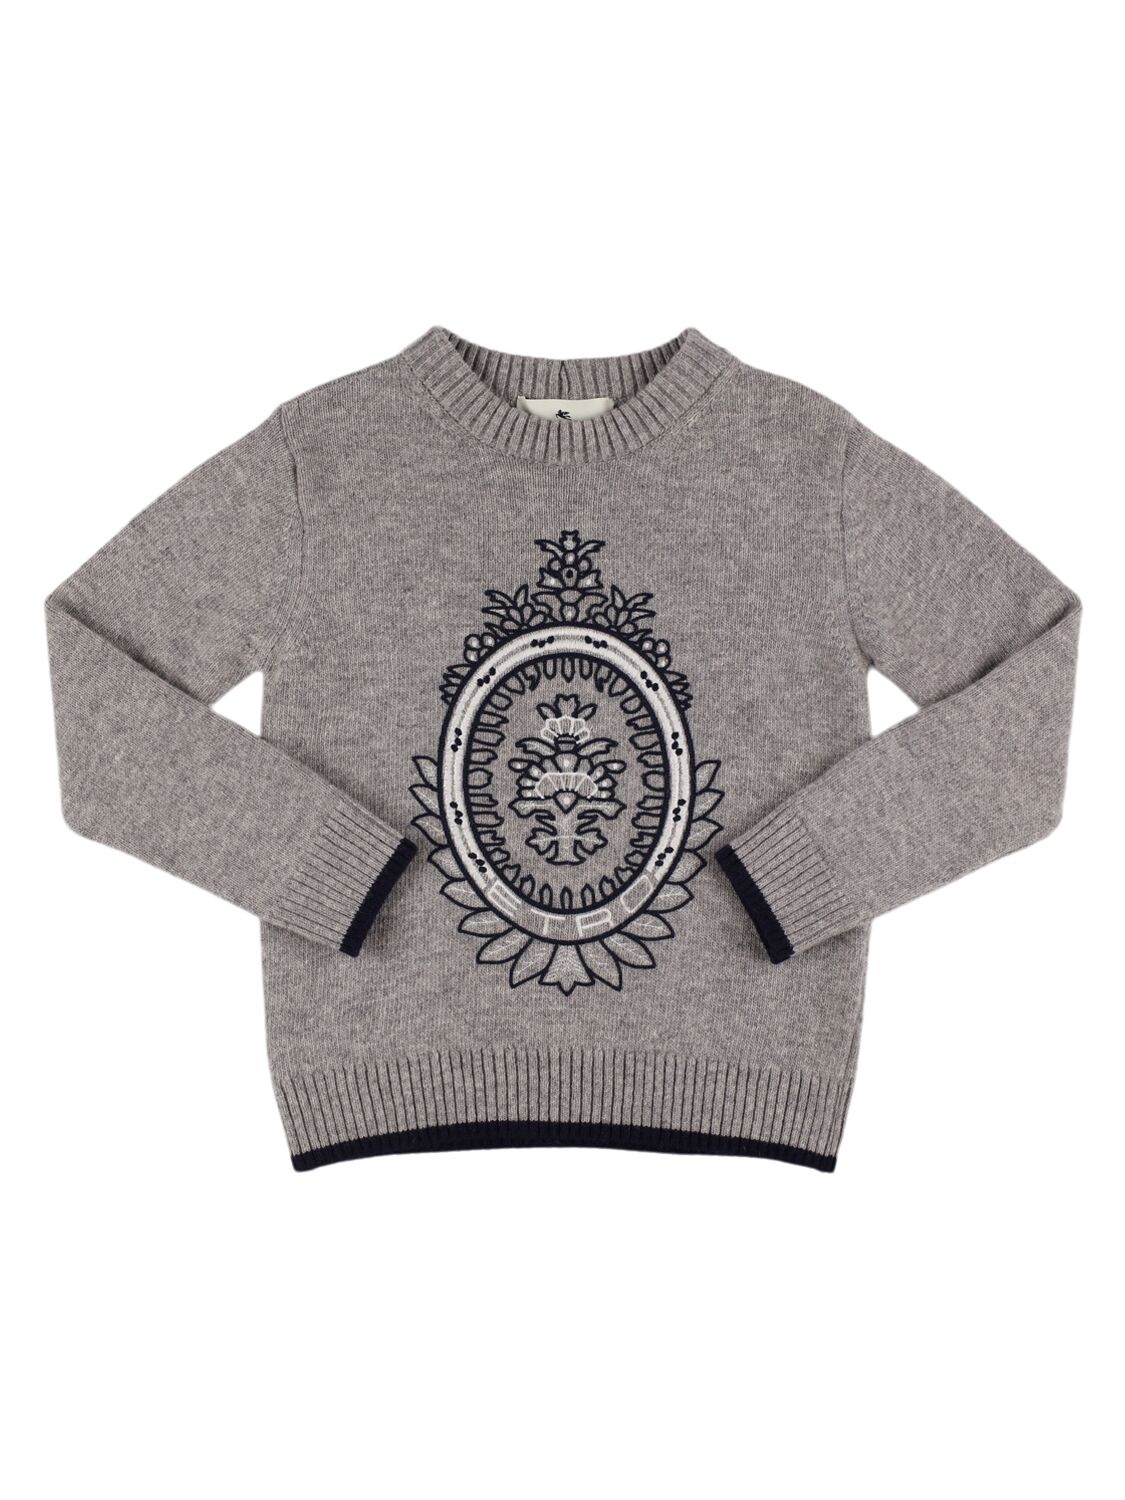 Etro Wool & Cashmere Knit Sweater In Gray